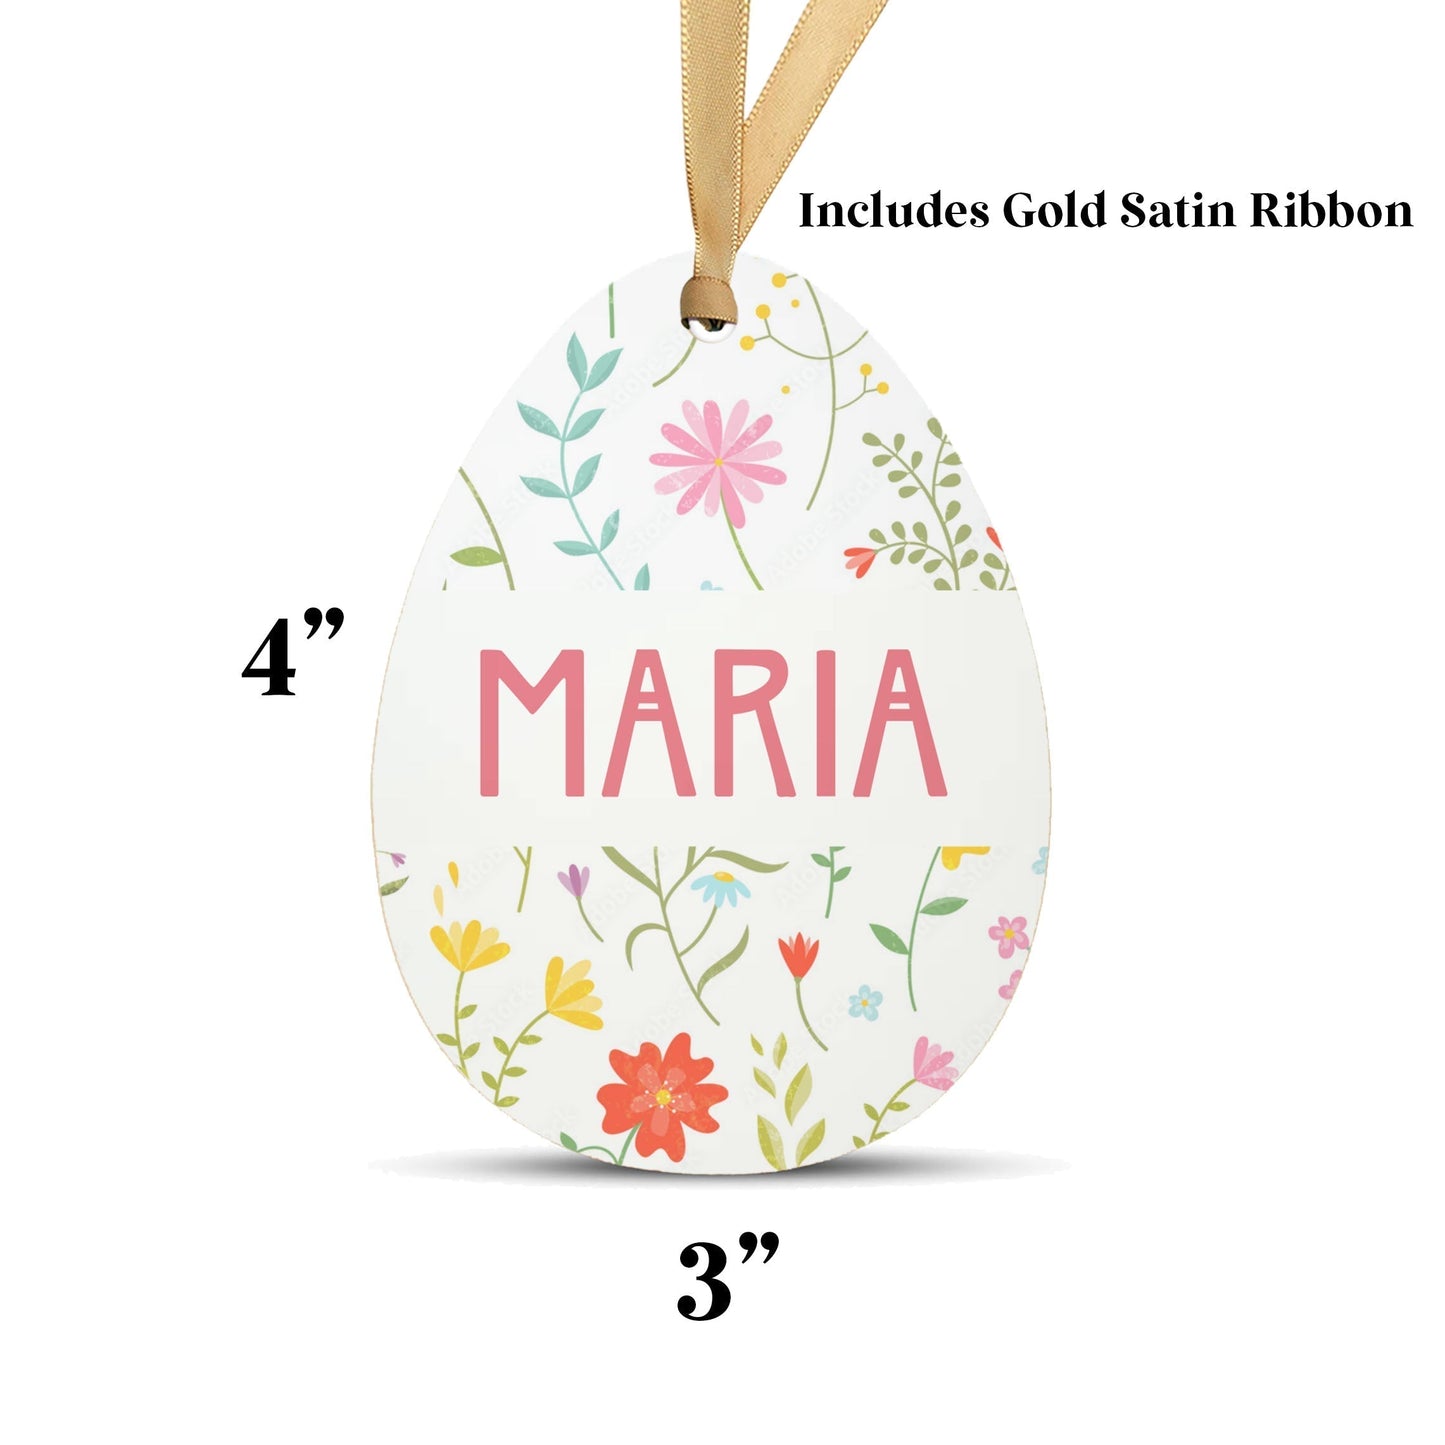 Personalized Easter Basket Name Tag | Sunflower Purple